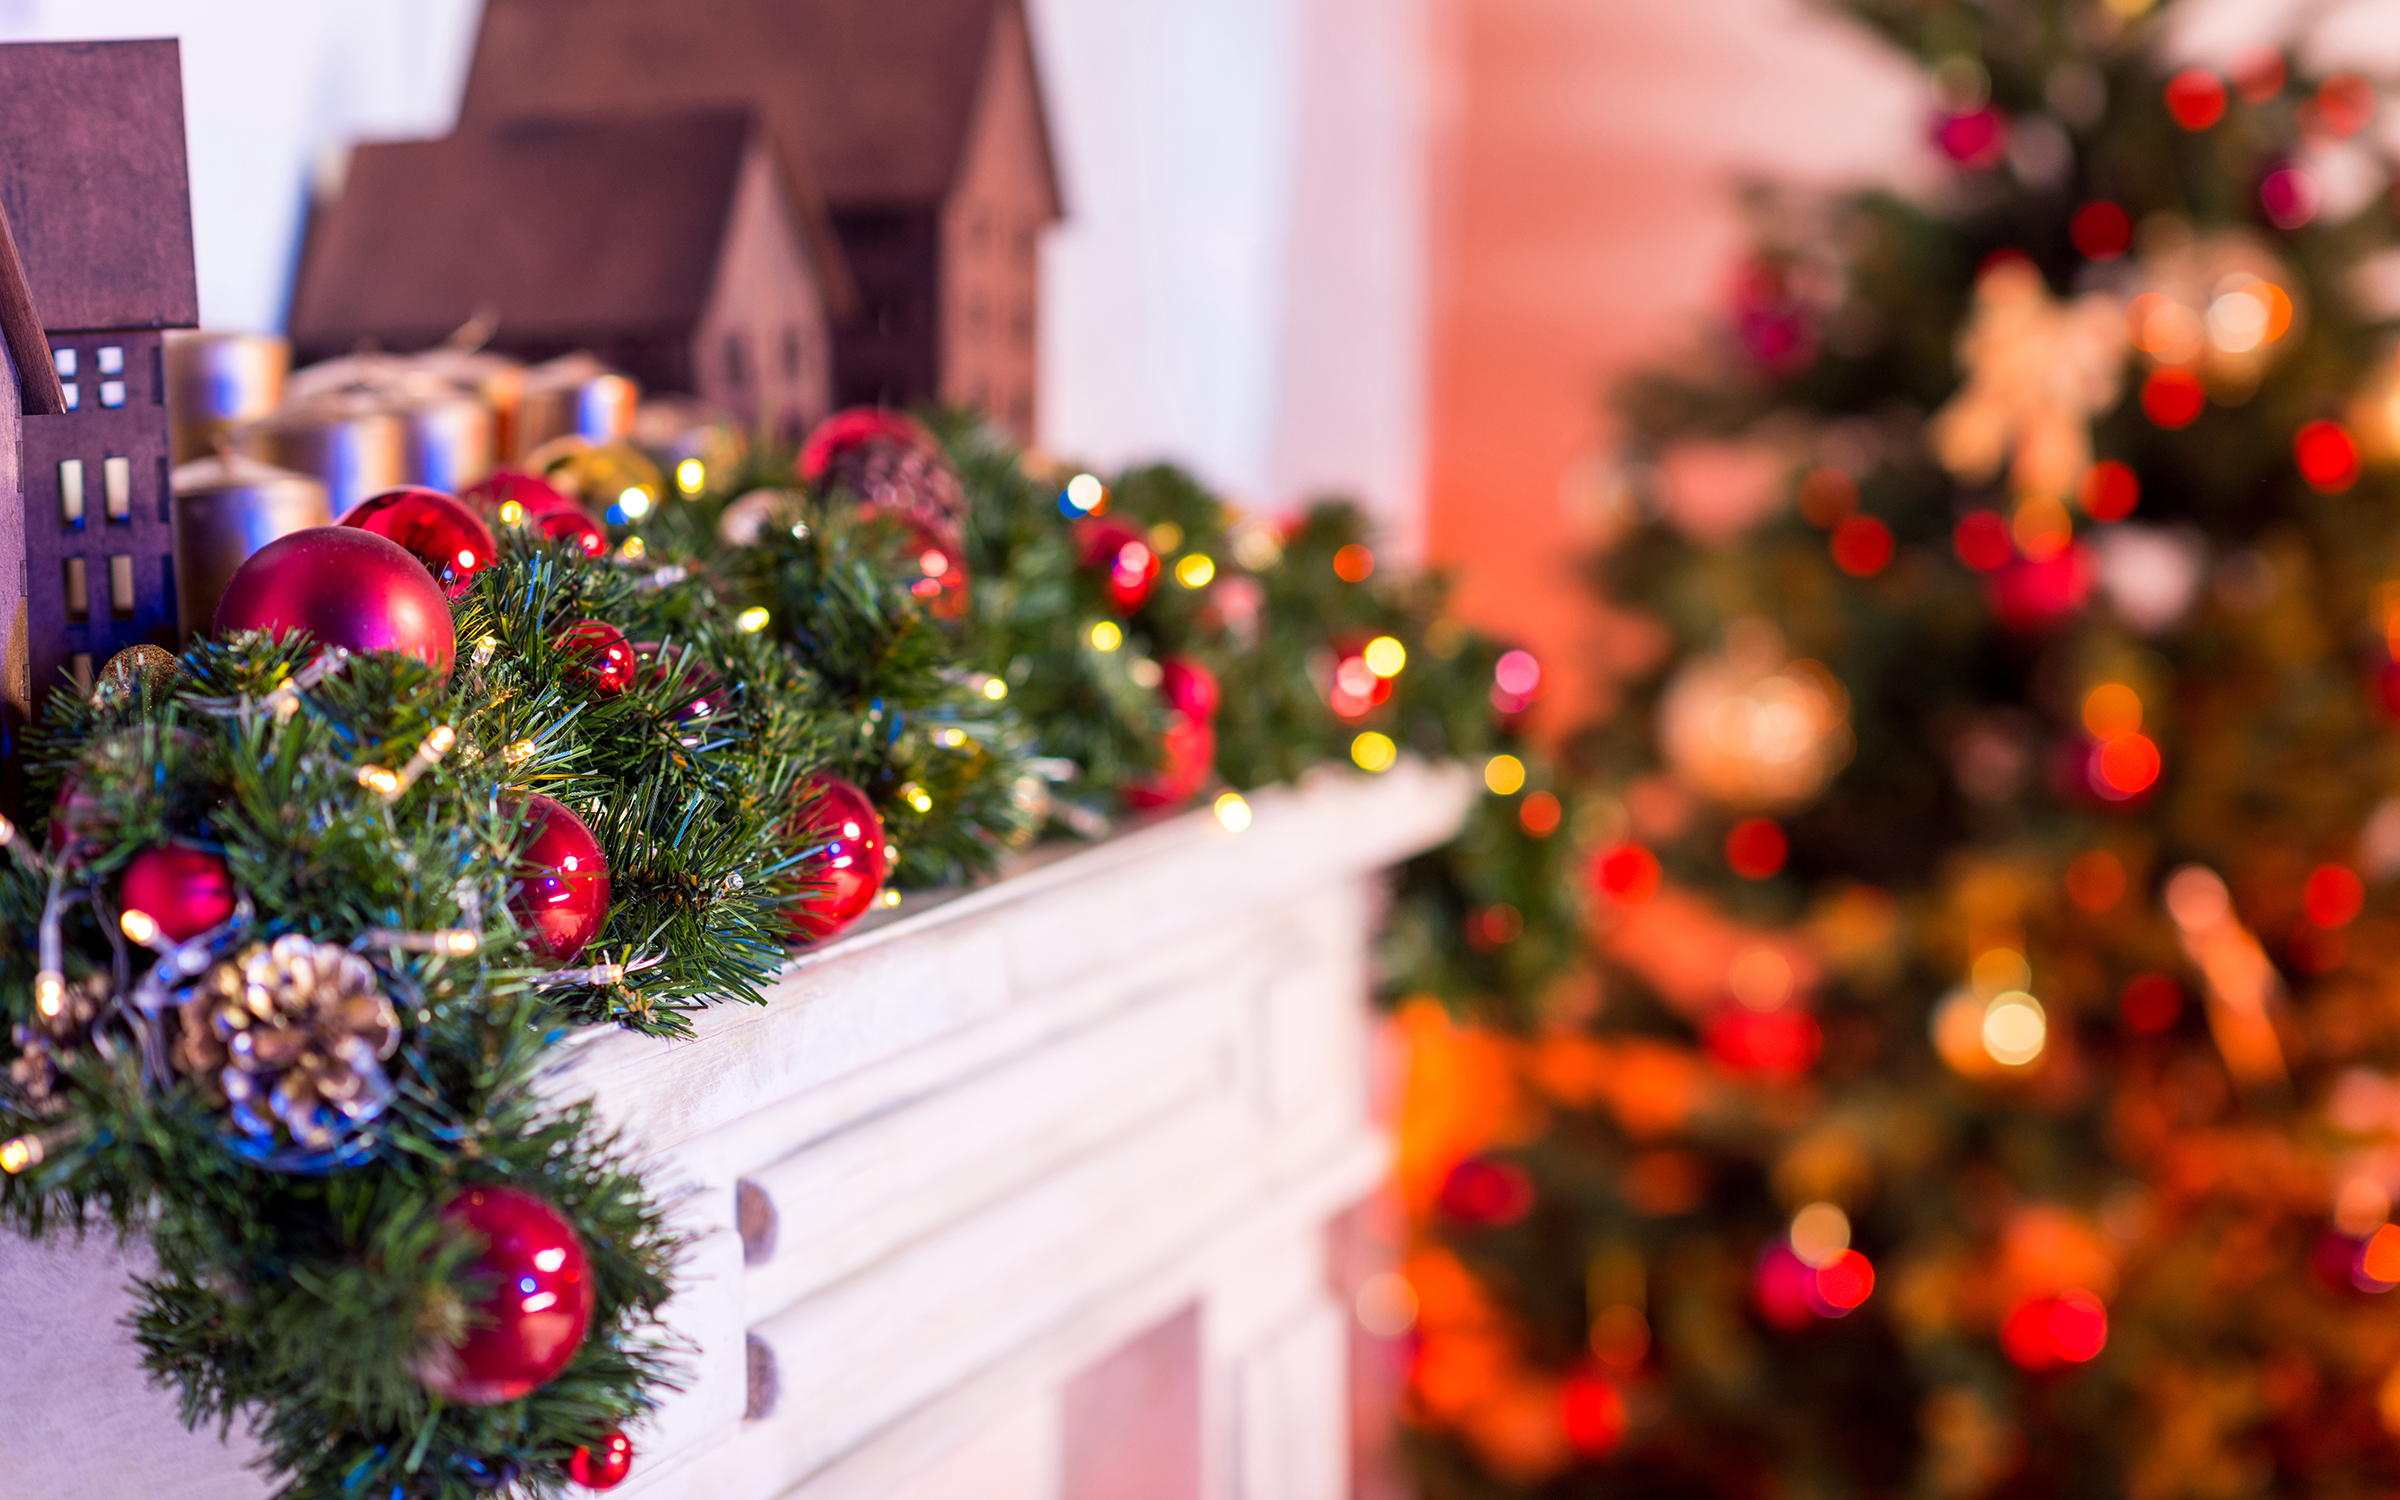 mantel decorated with pine garland, ornaments, wooden Christmas village buildings, Christmas tree in background